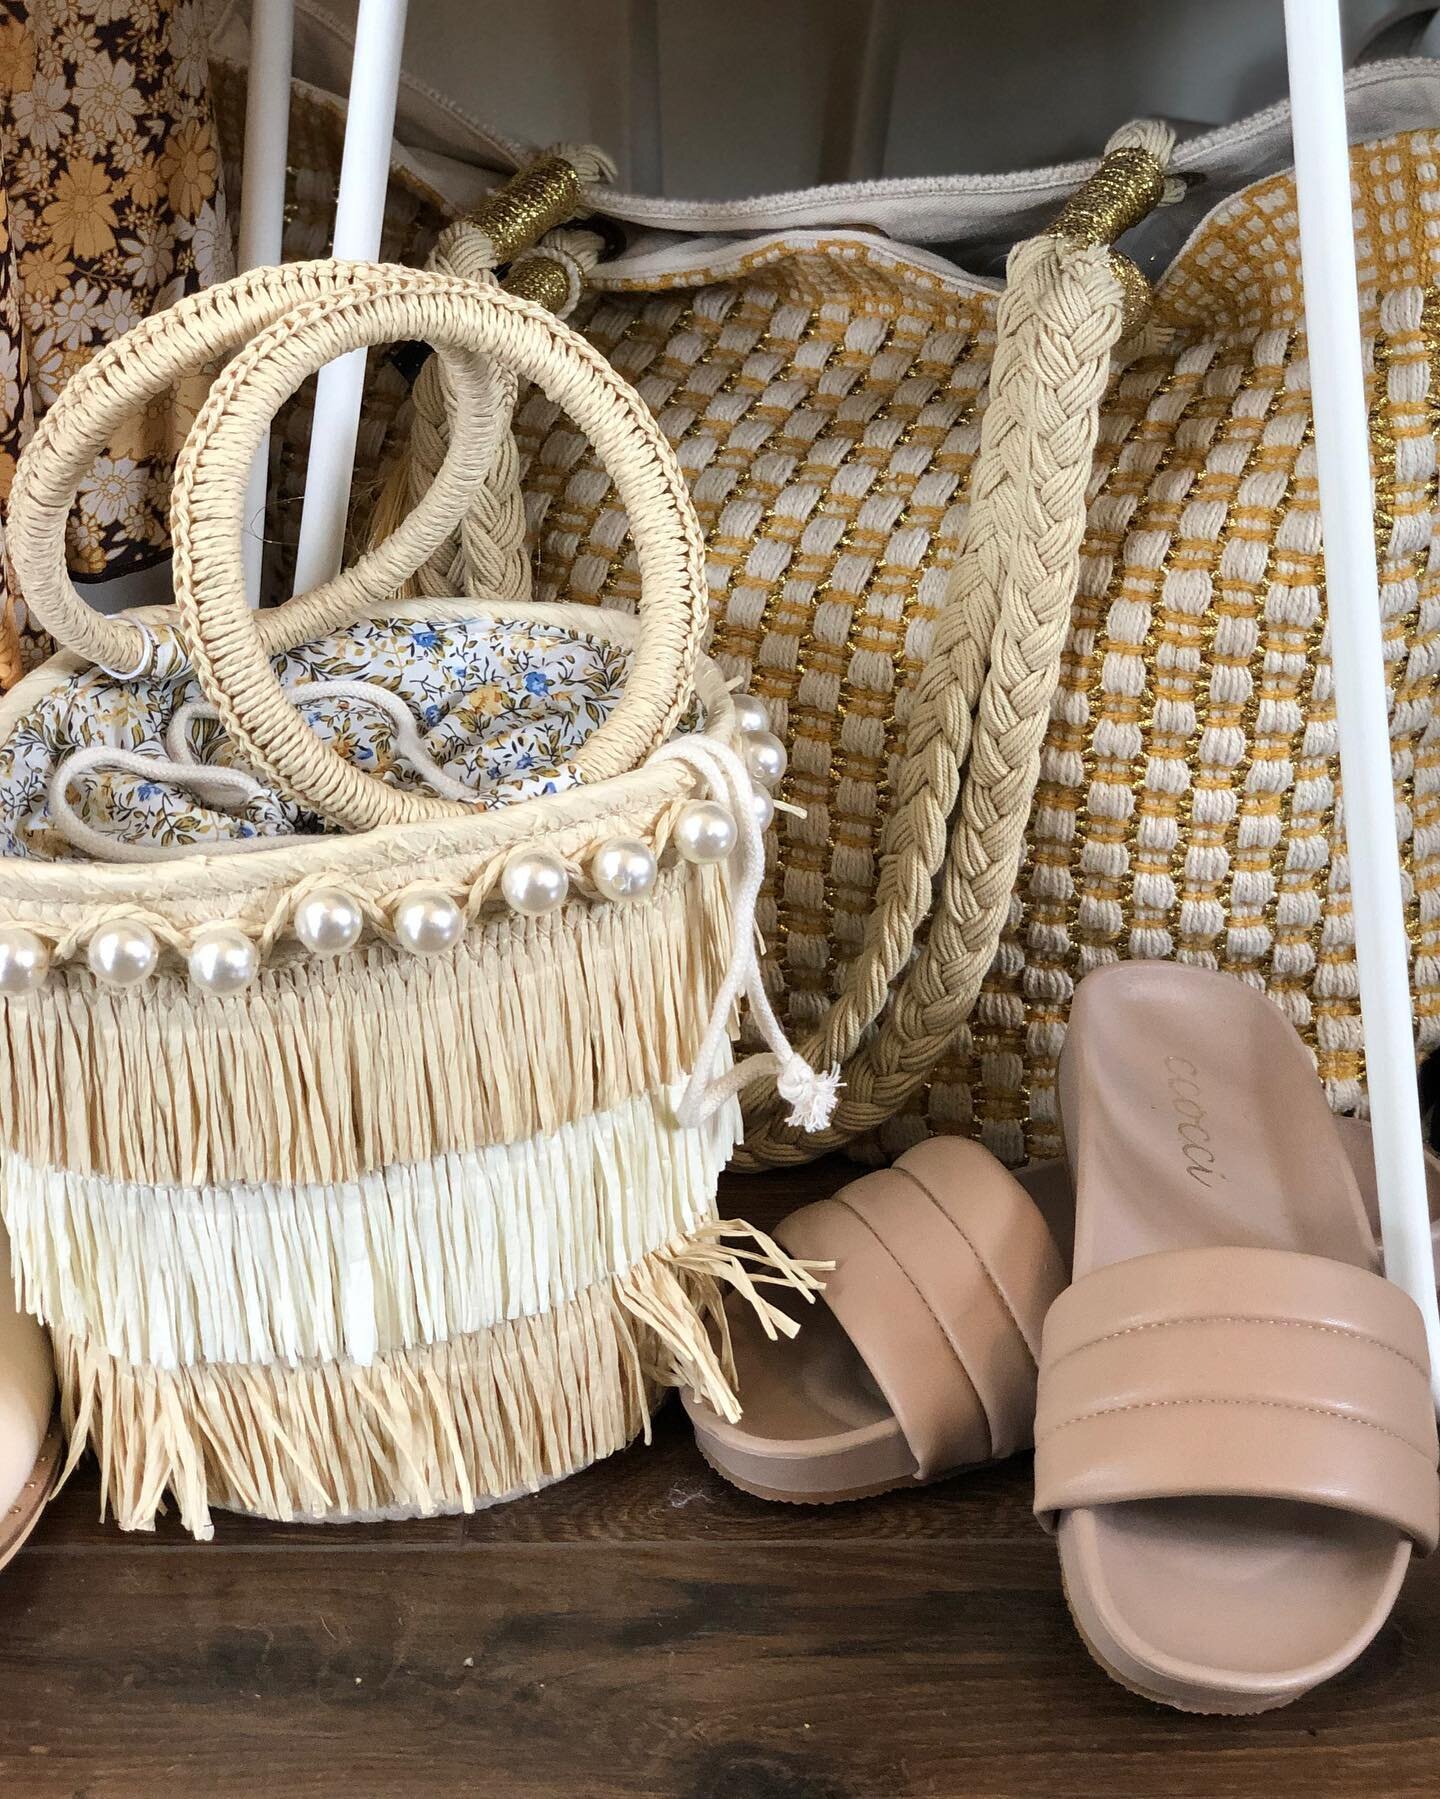 Poolside essentials ☀️ Shop adorable new summer accessories today until 6pm!